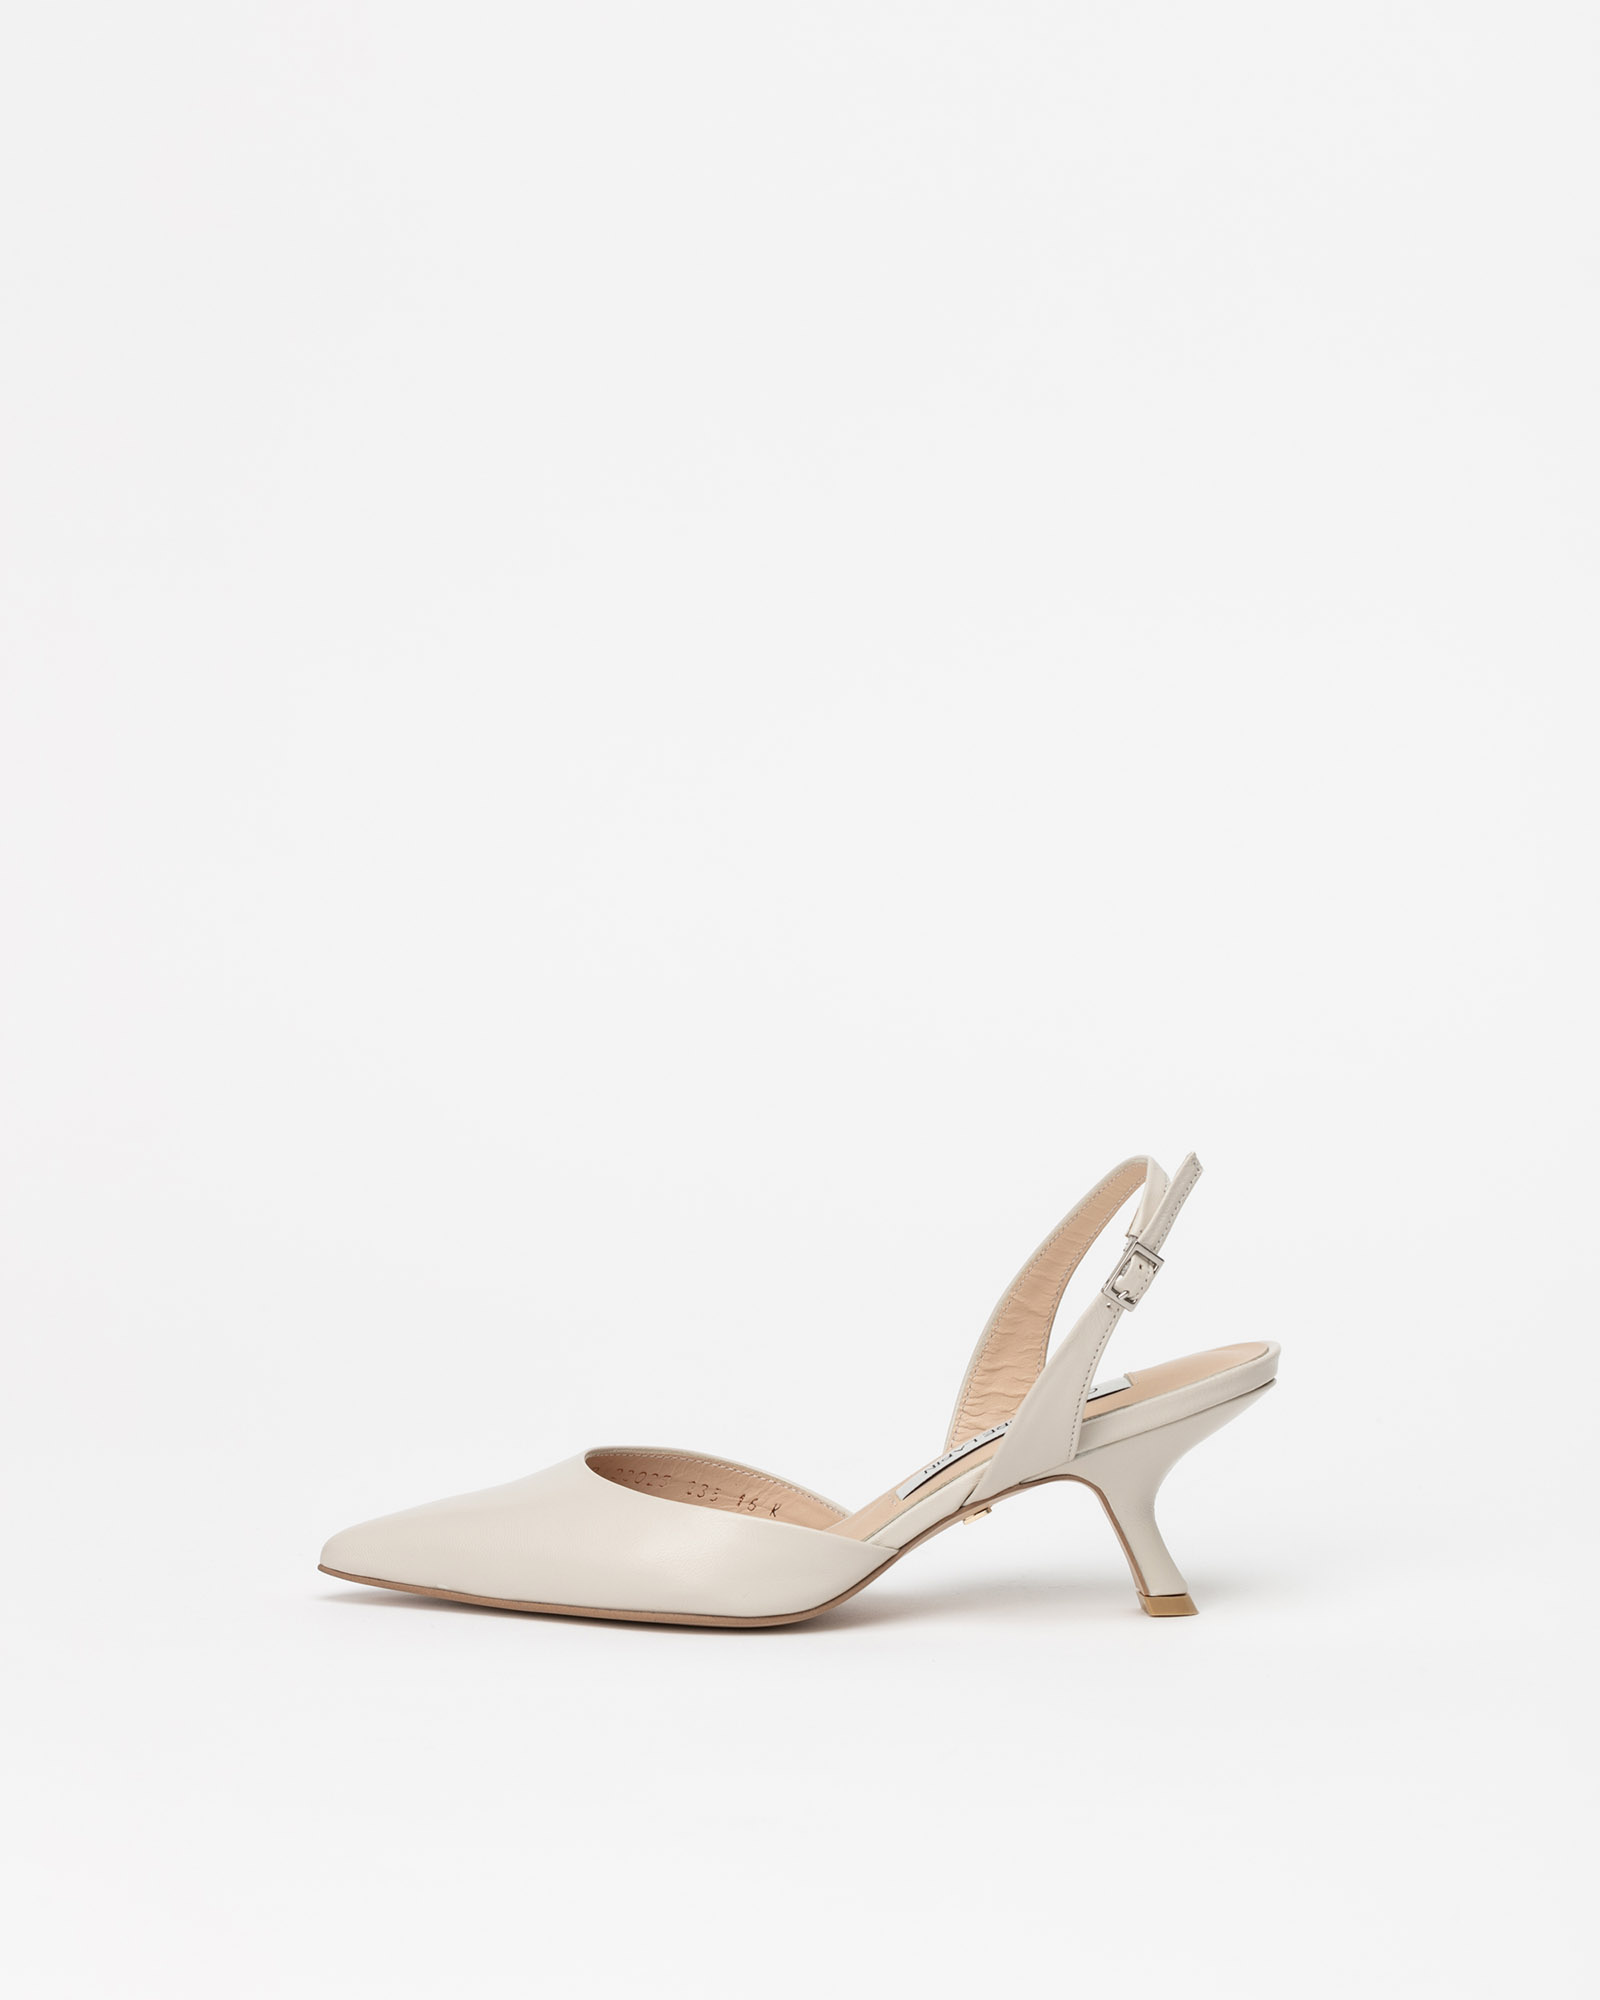 Coppia Slingback Pumps in Rainy Day